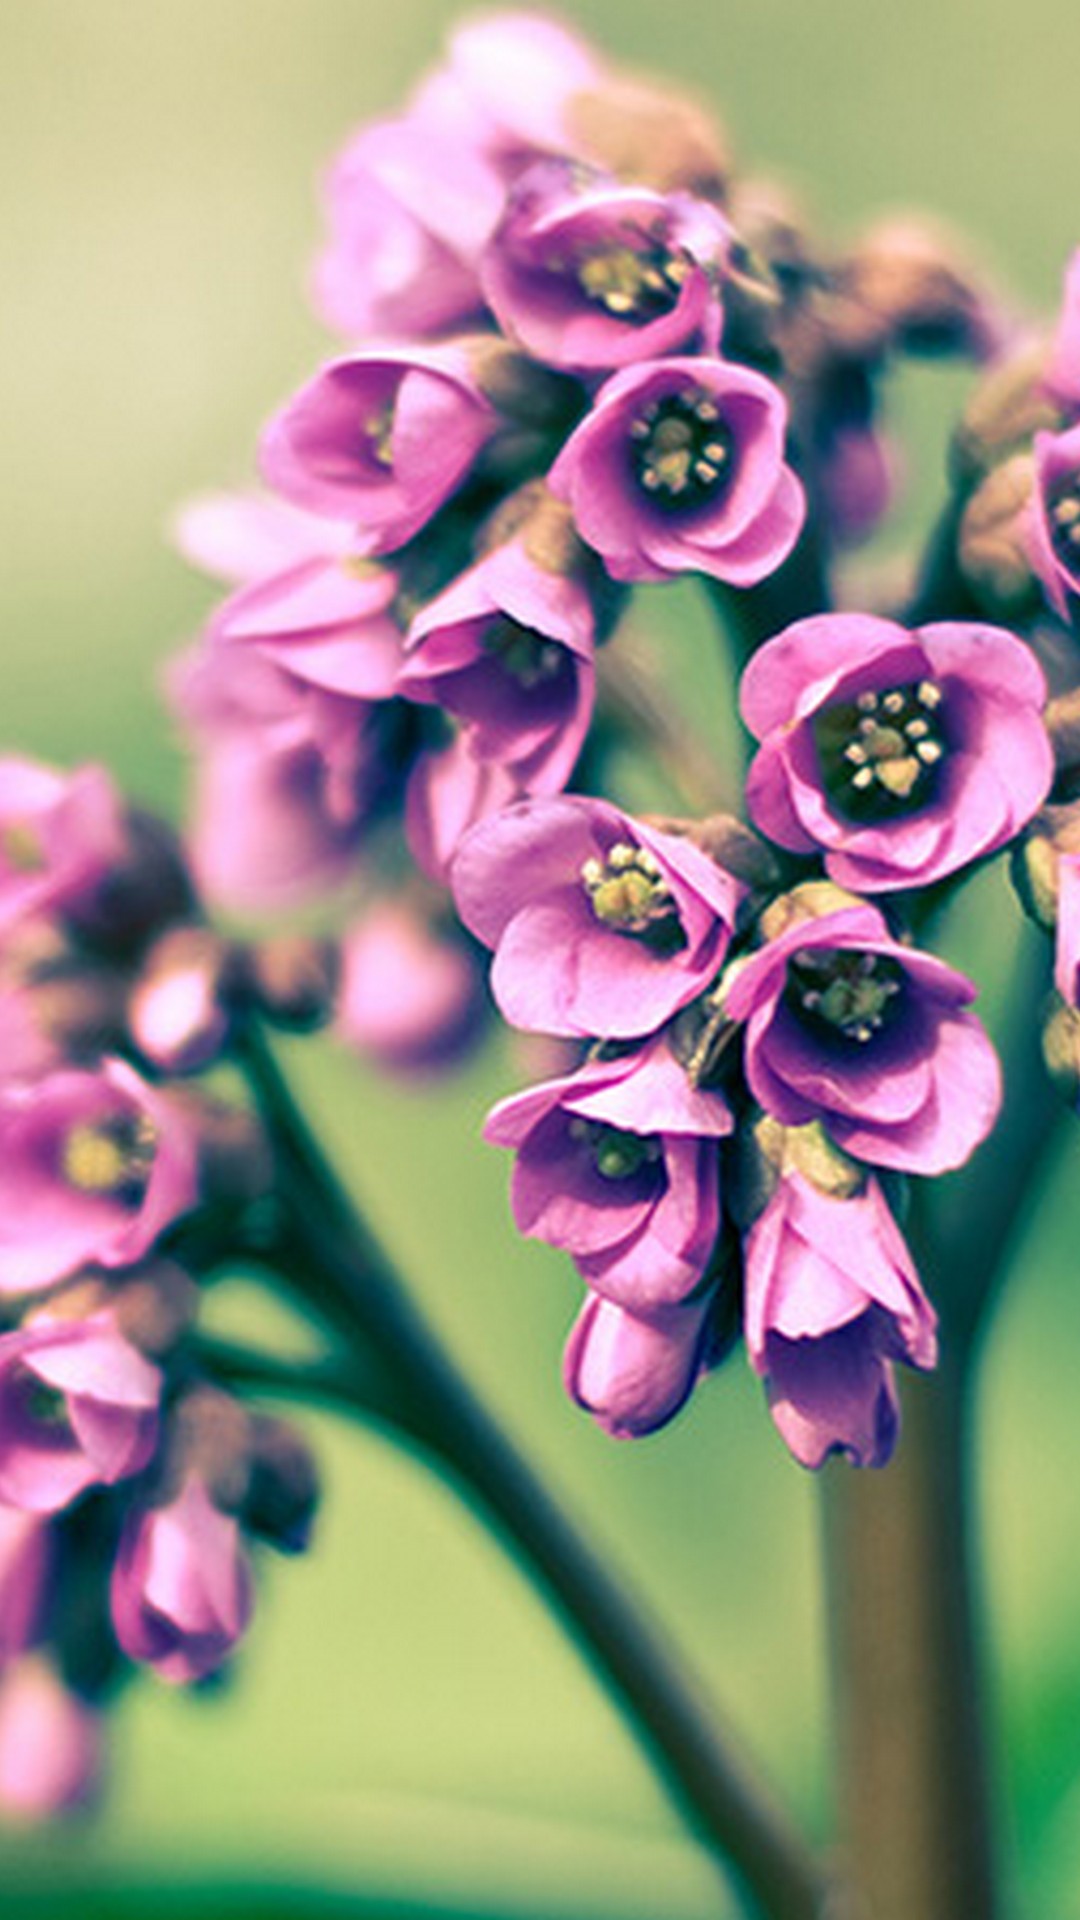 Wallpaper Spring Flowers Android with HD resolution 1080x1920